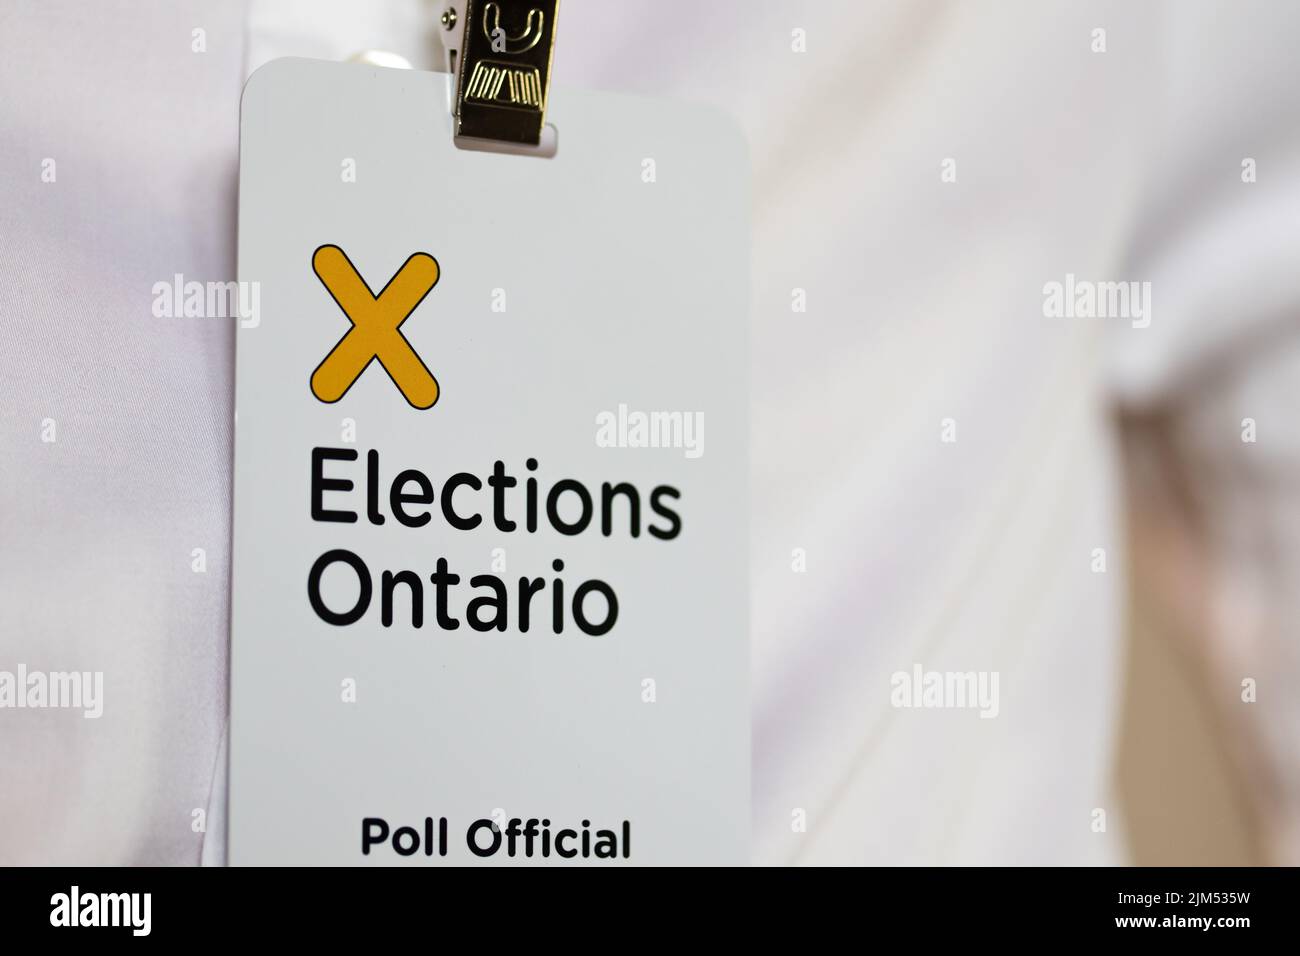 The Election Ontario logo is seen closeup on the badge of a Poll Official working for Elections Ontario. Stock Photo